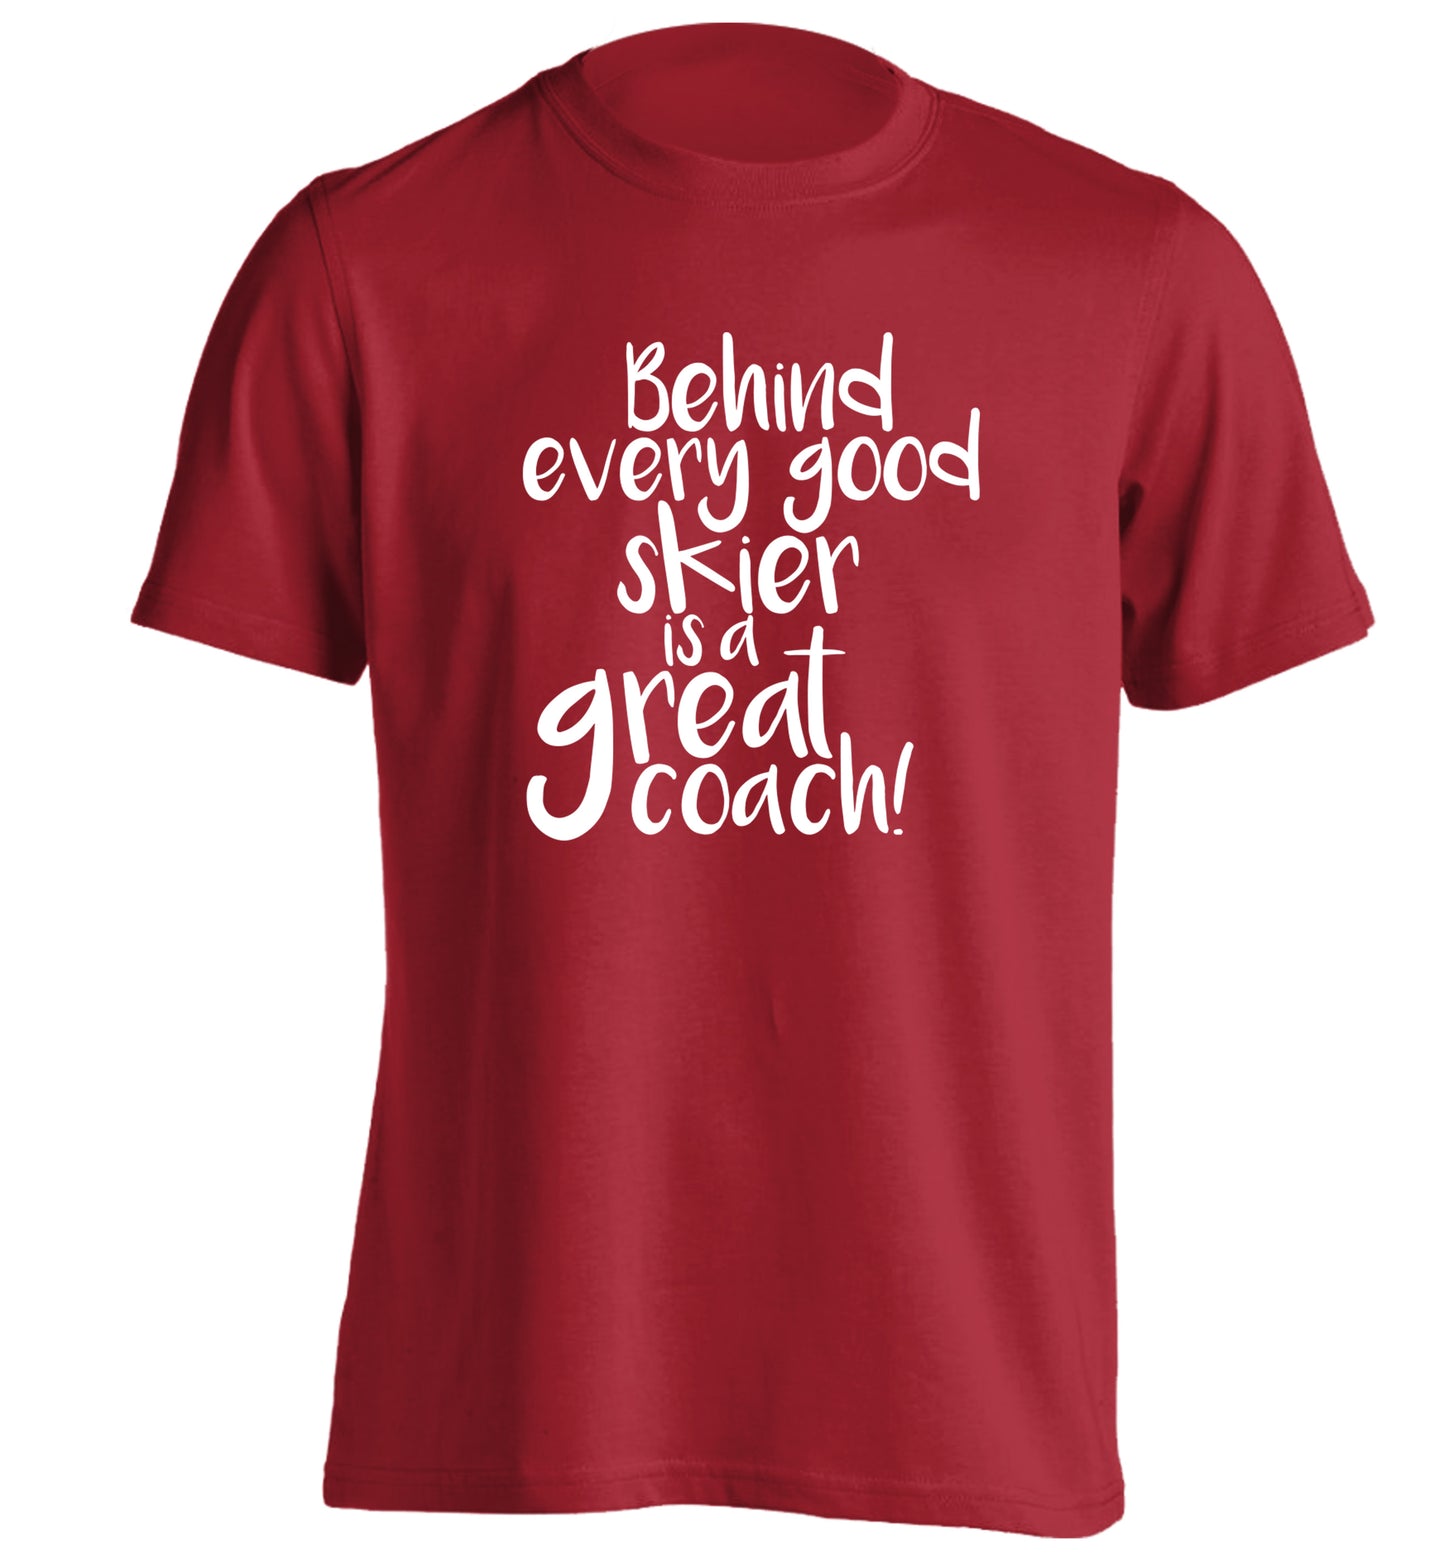 Behind every good skier is a great coach! adults unisexred Tshirt 2XL